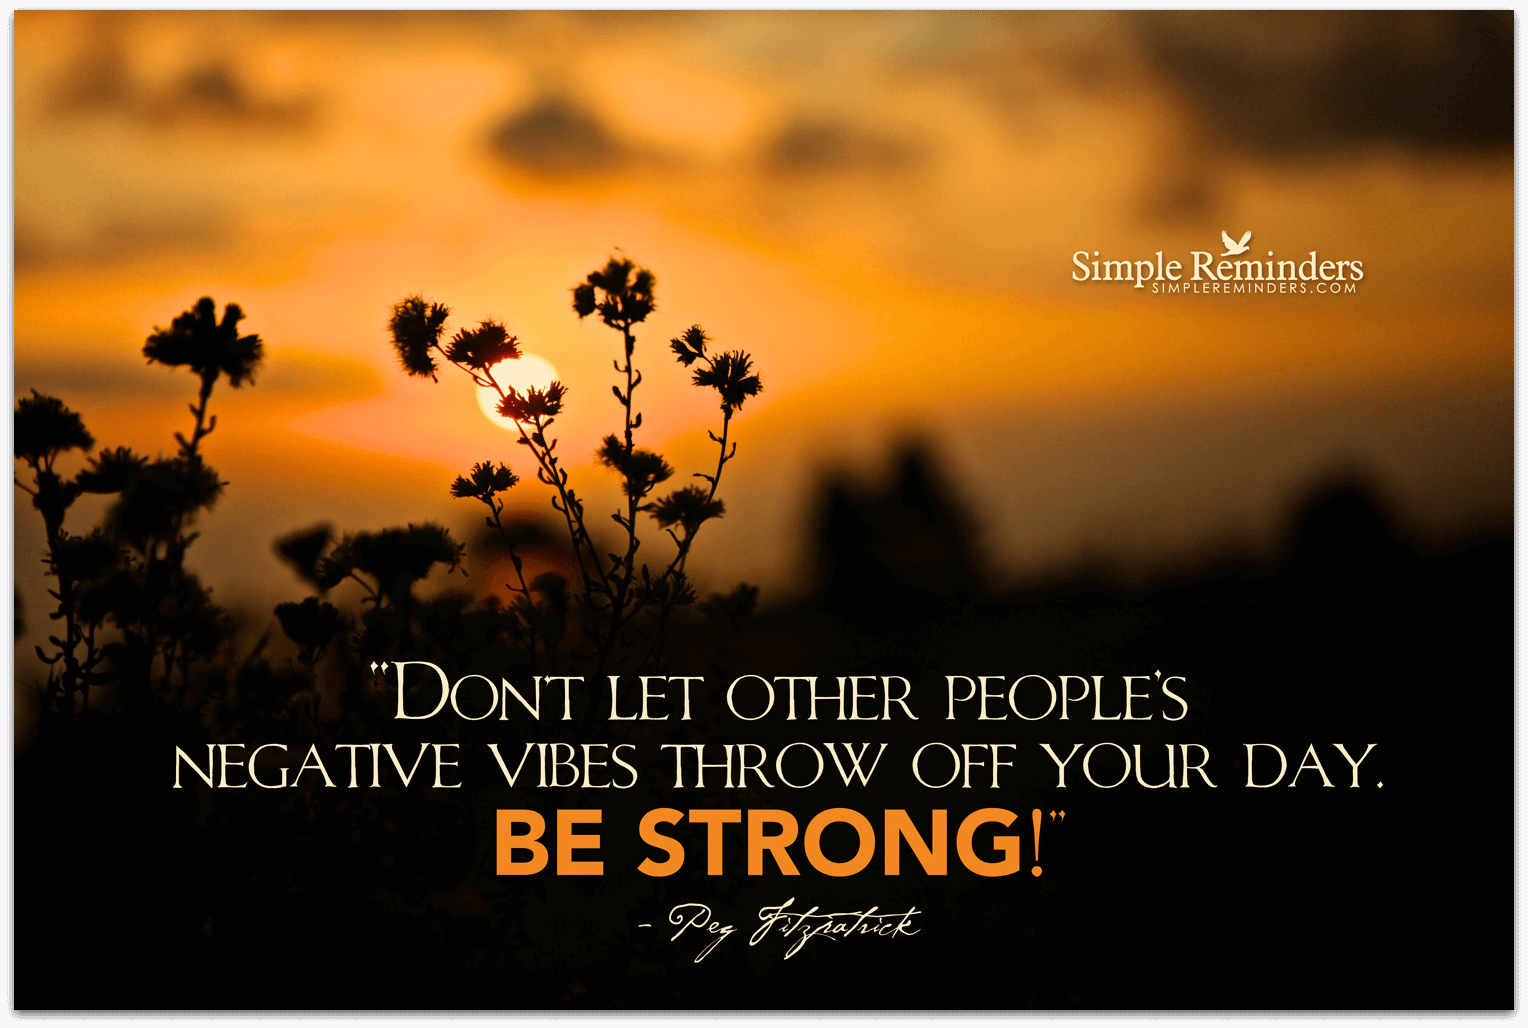 Don't let other people's negative vibes throw off your day. Be strong.